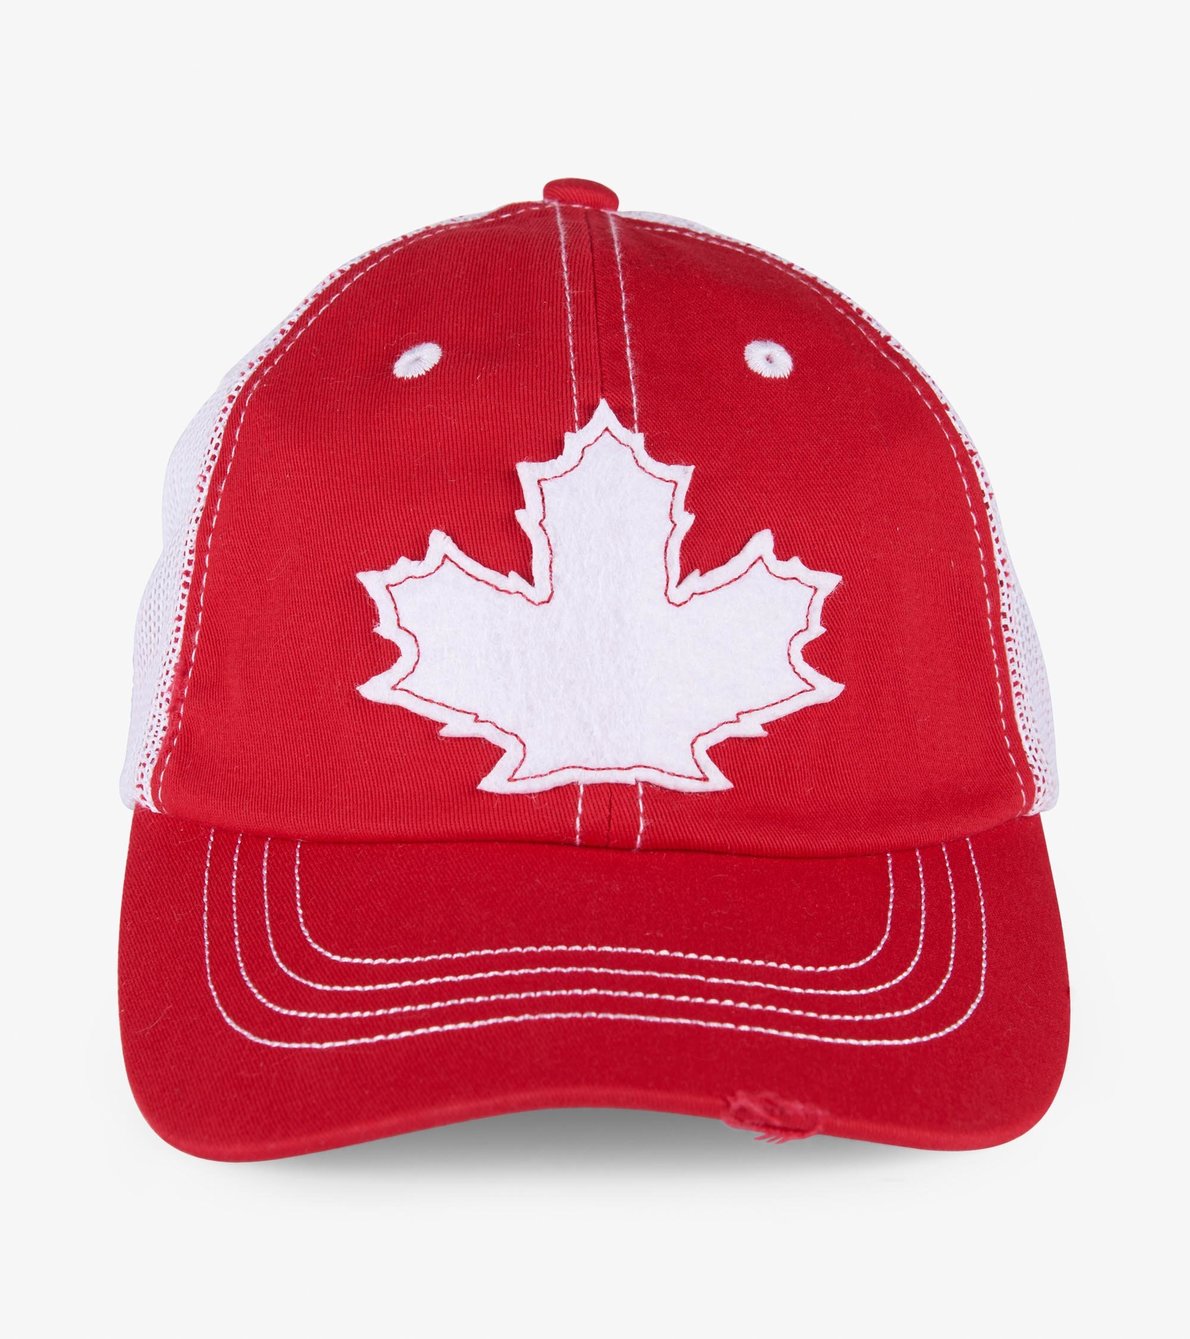 View larger image of Maple Leaf Adult Baseball Cap